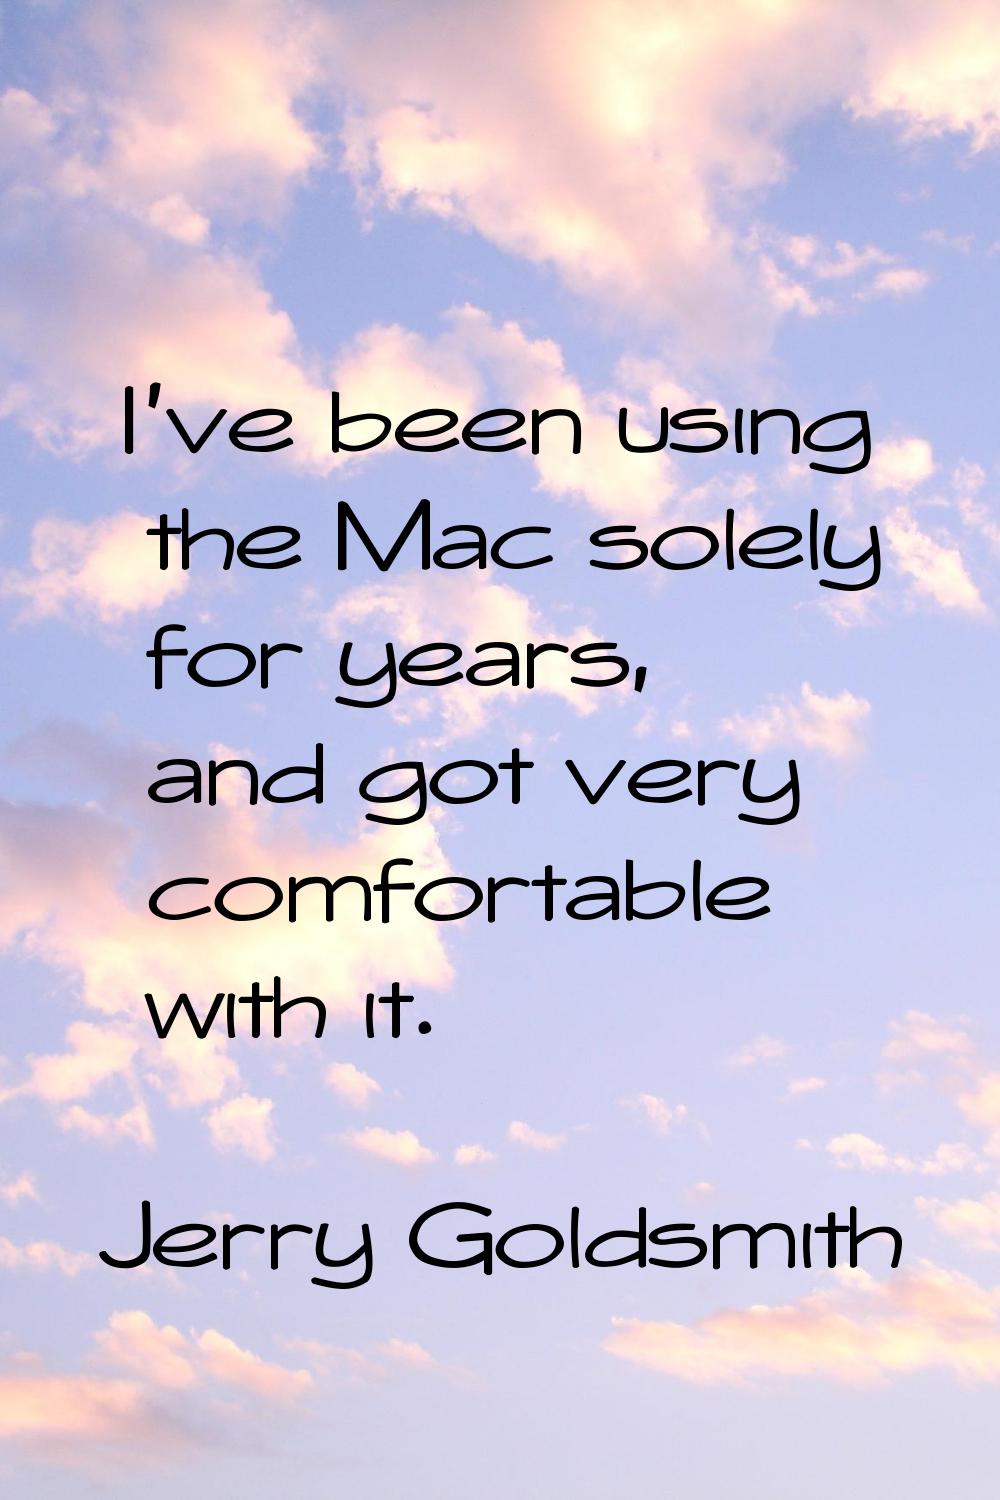 I've been using the Mac solely for years, and got very comfortable with it.